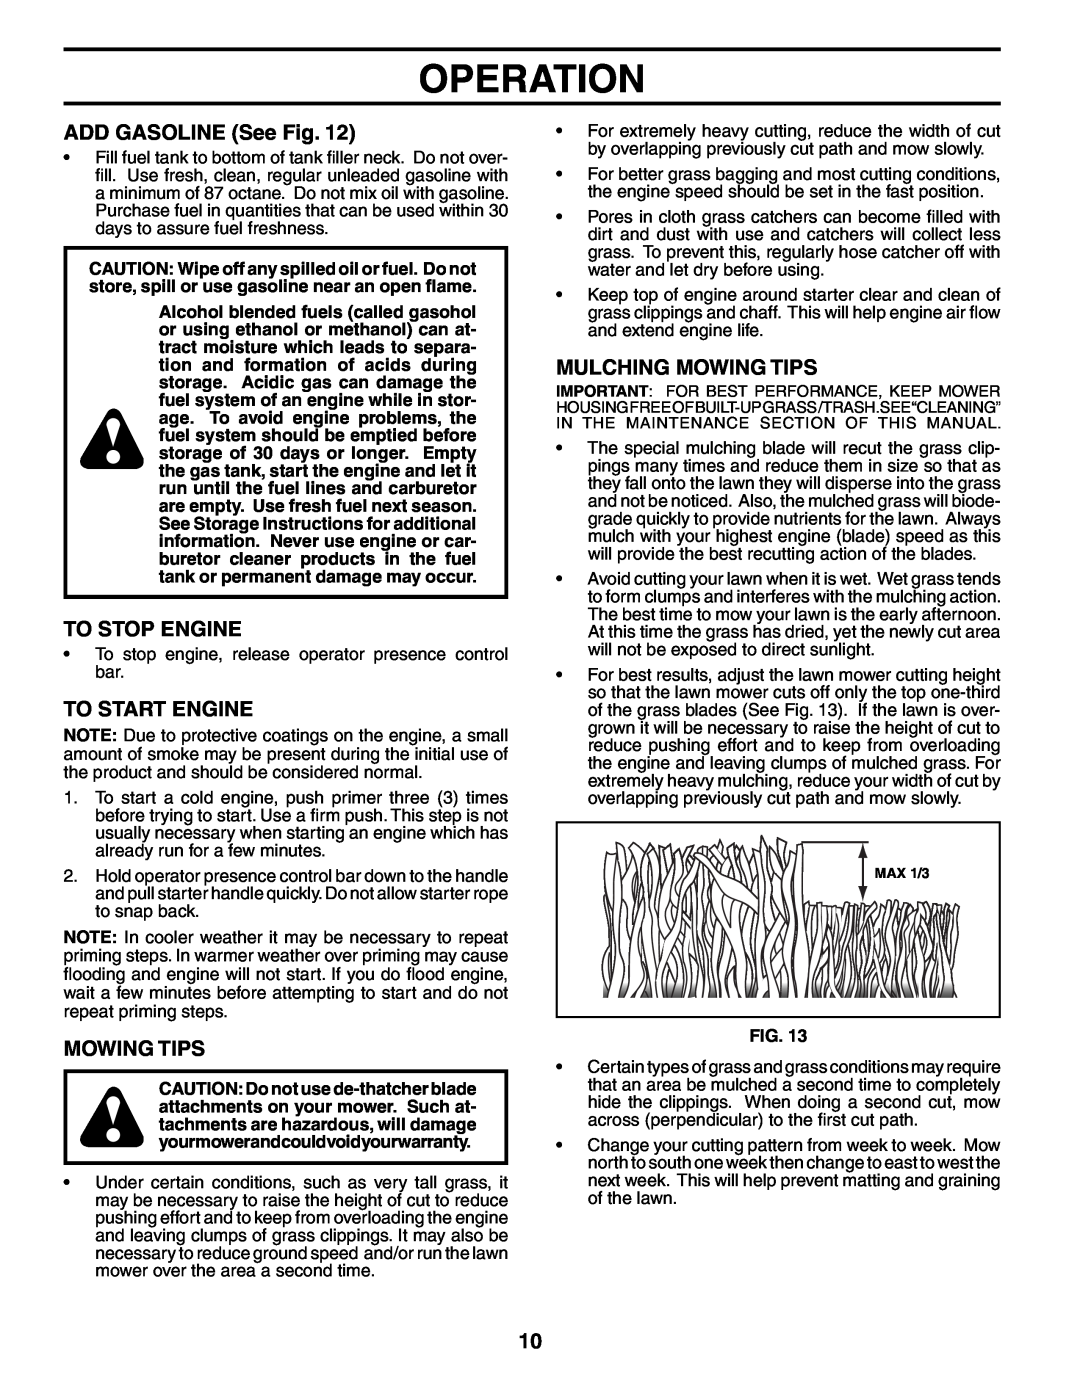 Husqvarna 67521 HV owner manual ADD GASOLINE See Fig, To Stop Engine, To Start Engine, Mulching Mowing Tips, Operation 